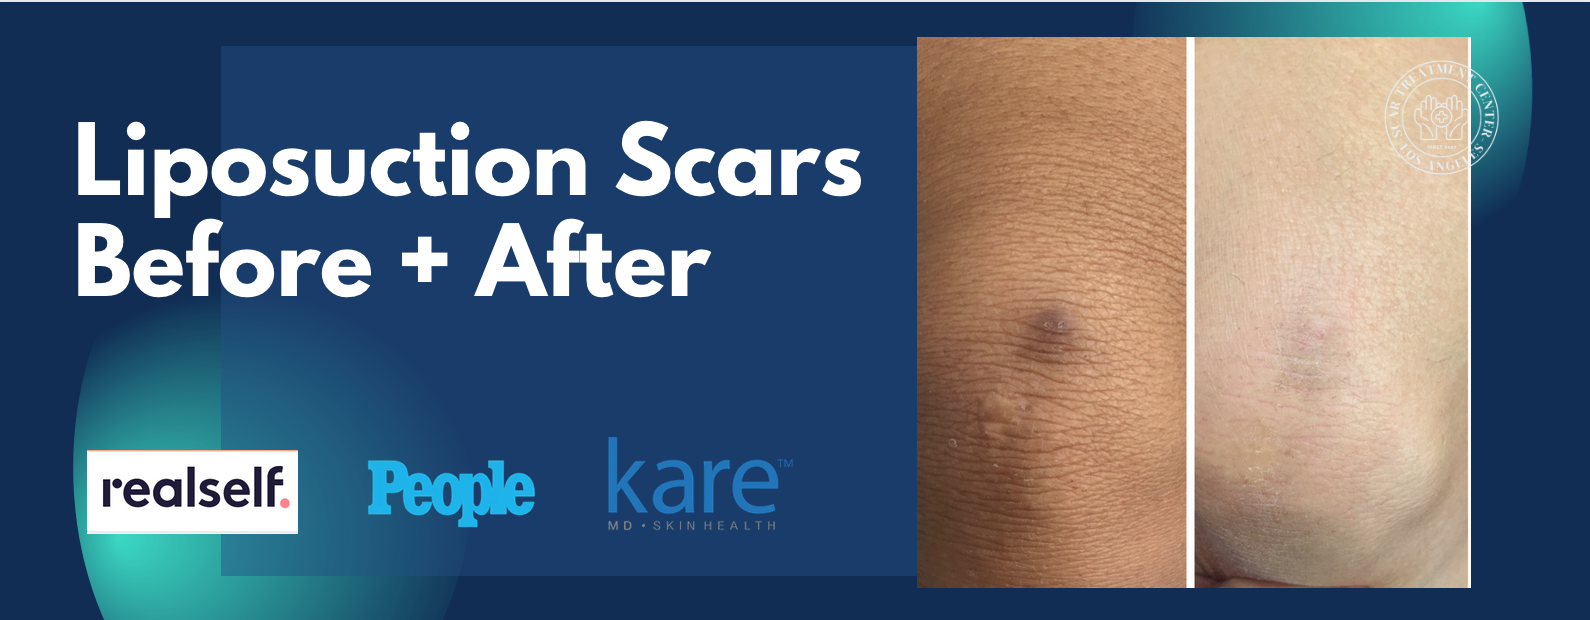 Liposuction Scar Removal with Kare Plastic Surgery Keloids and Hypertrophic Scar Los Angeles